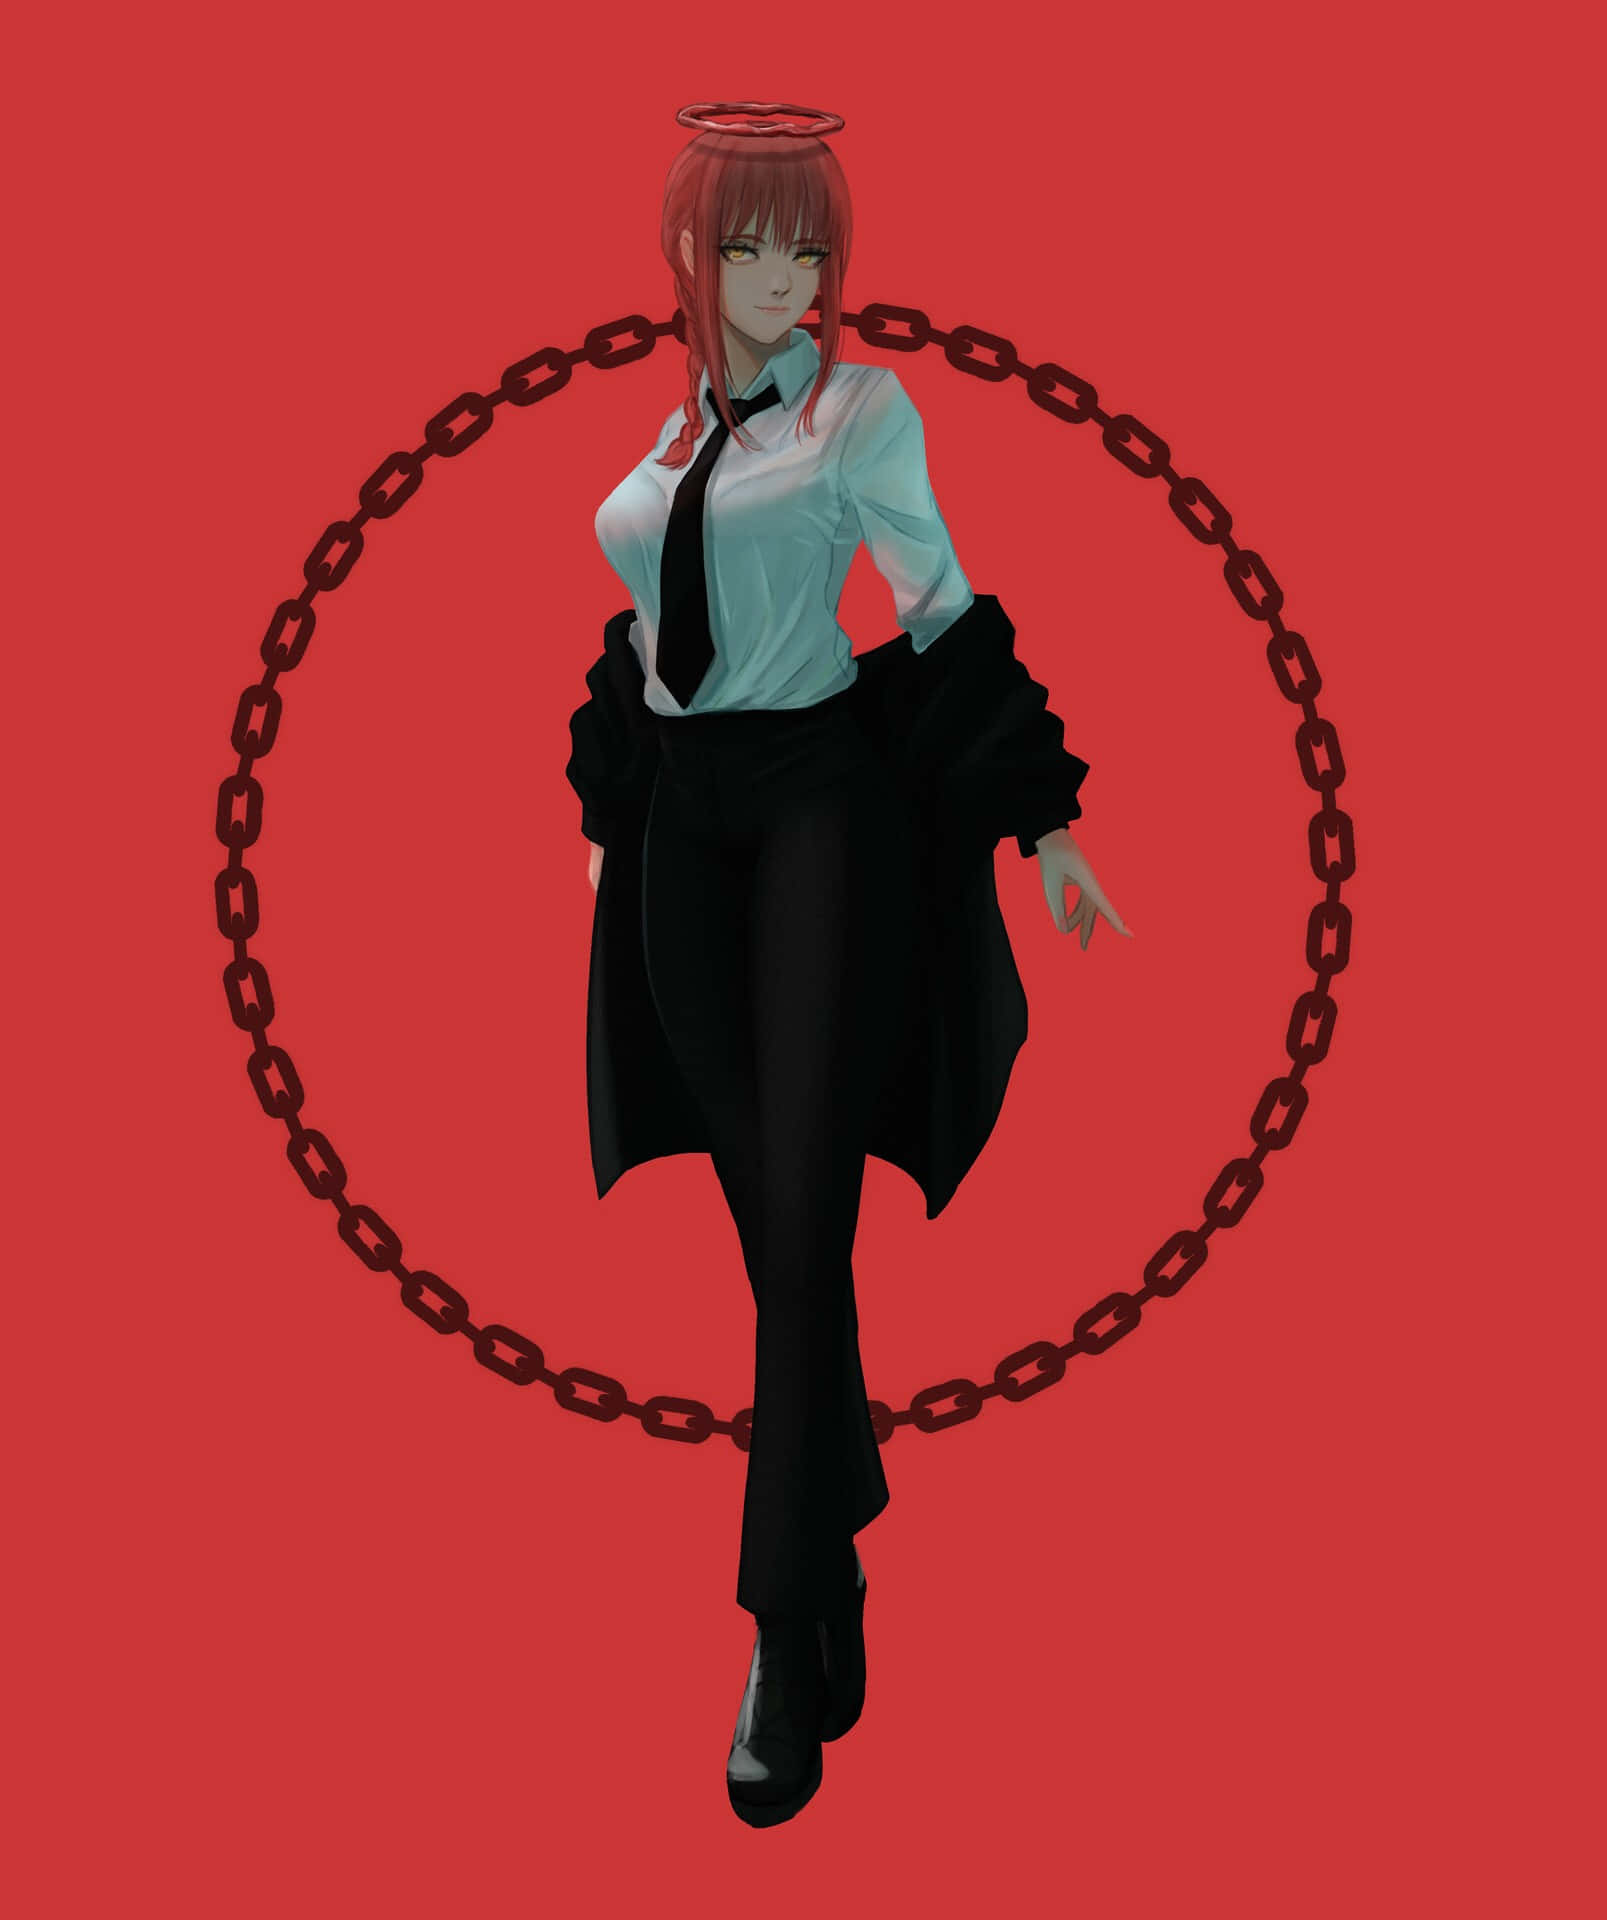 A Woman In A Tie And Chain Around A Red Background Wallpaper